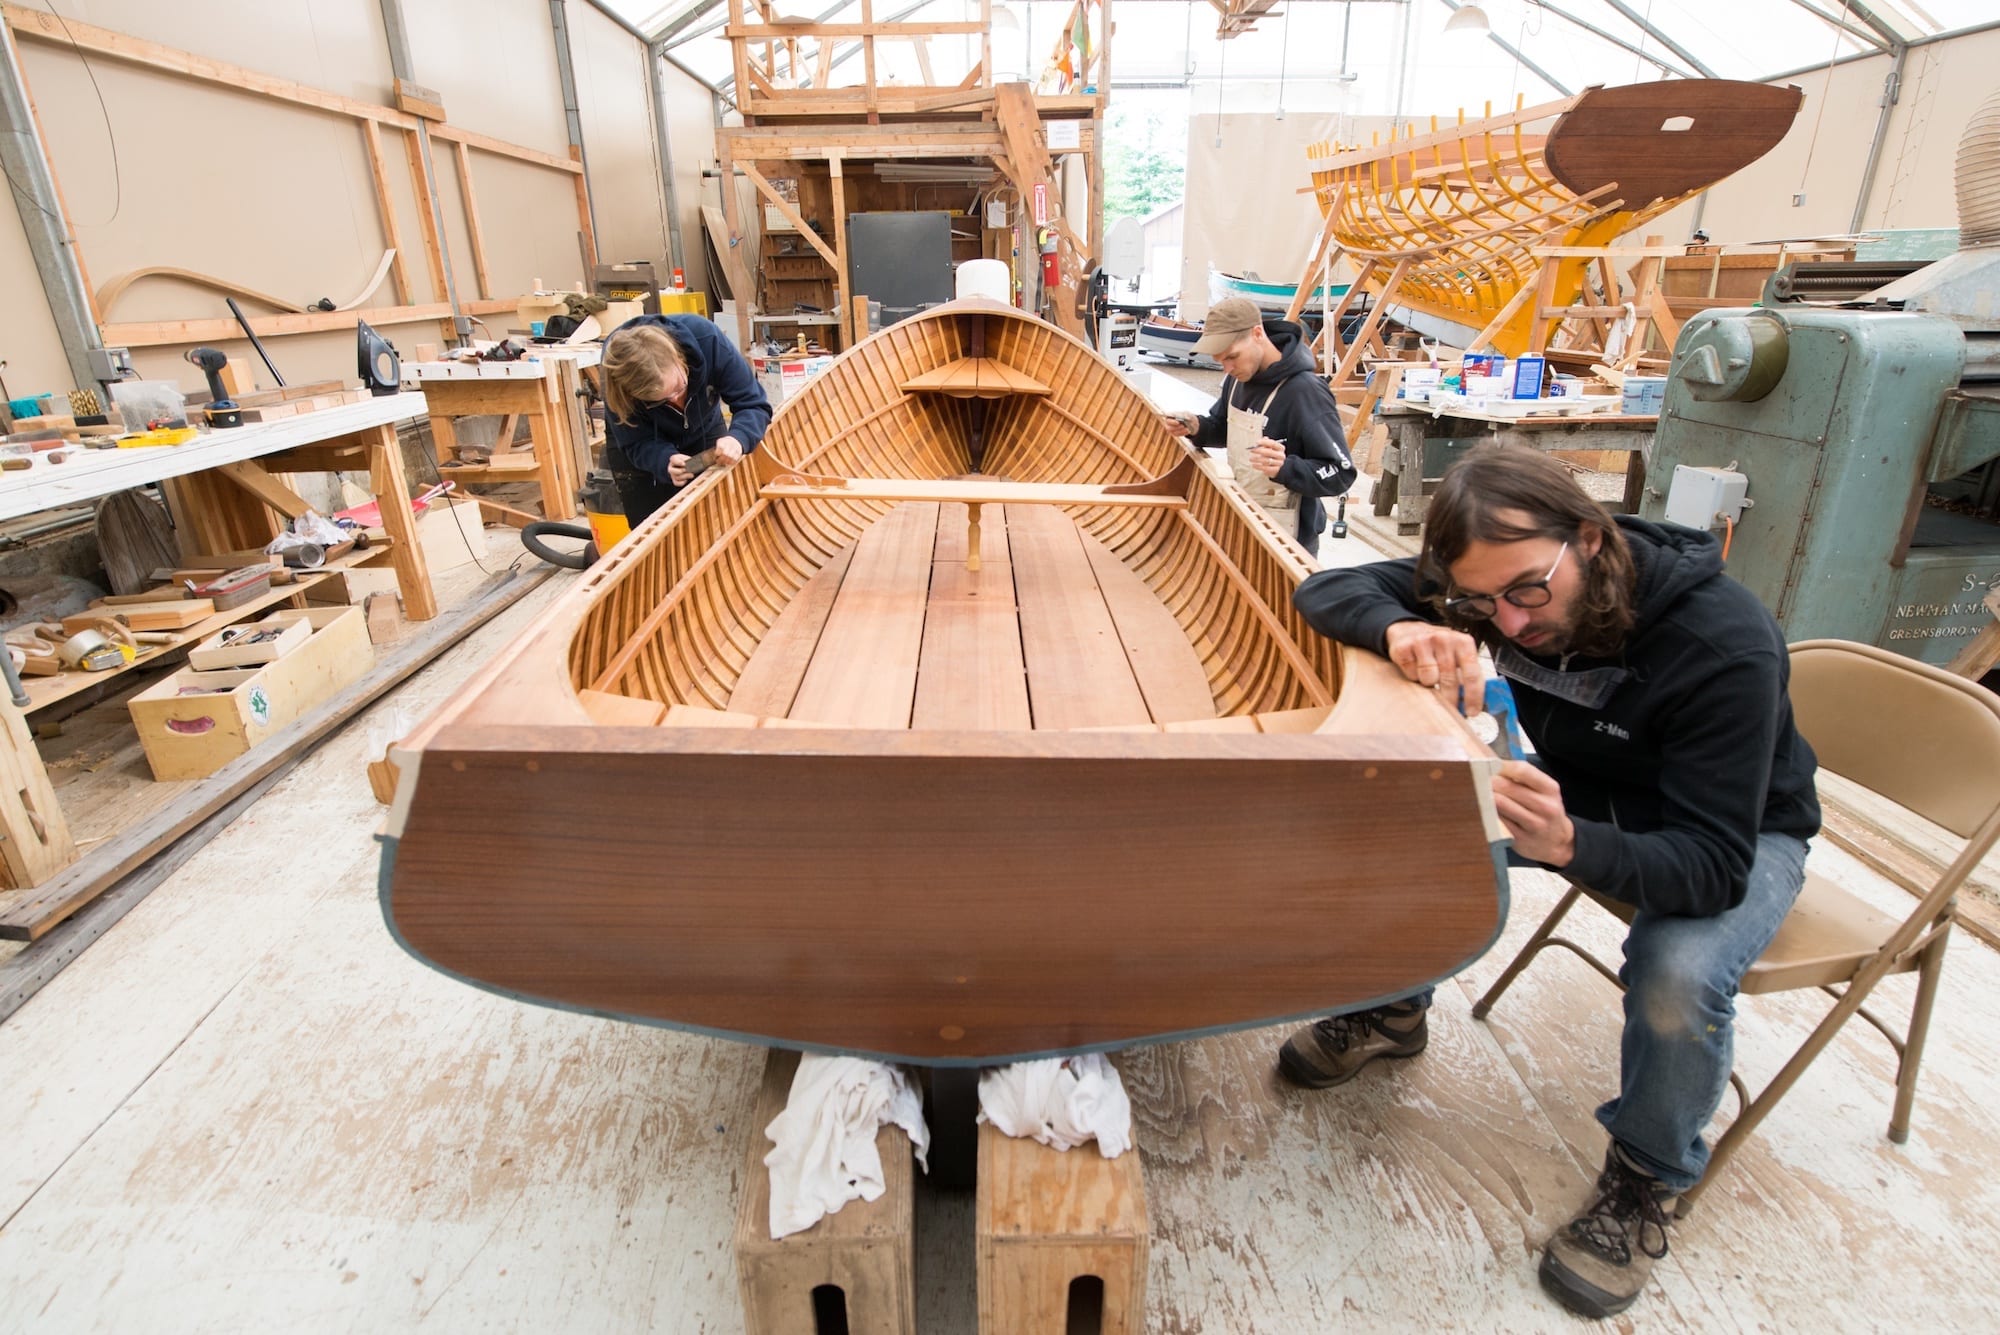 ICYMI: Drilling Students in Repair (And History) at This Boat Building School